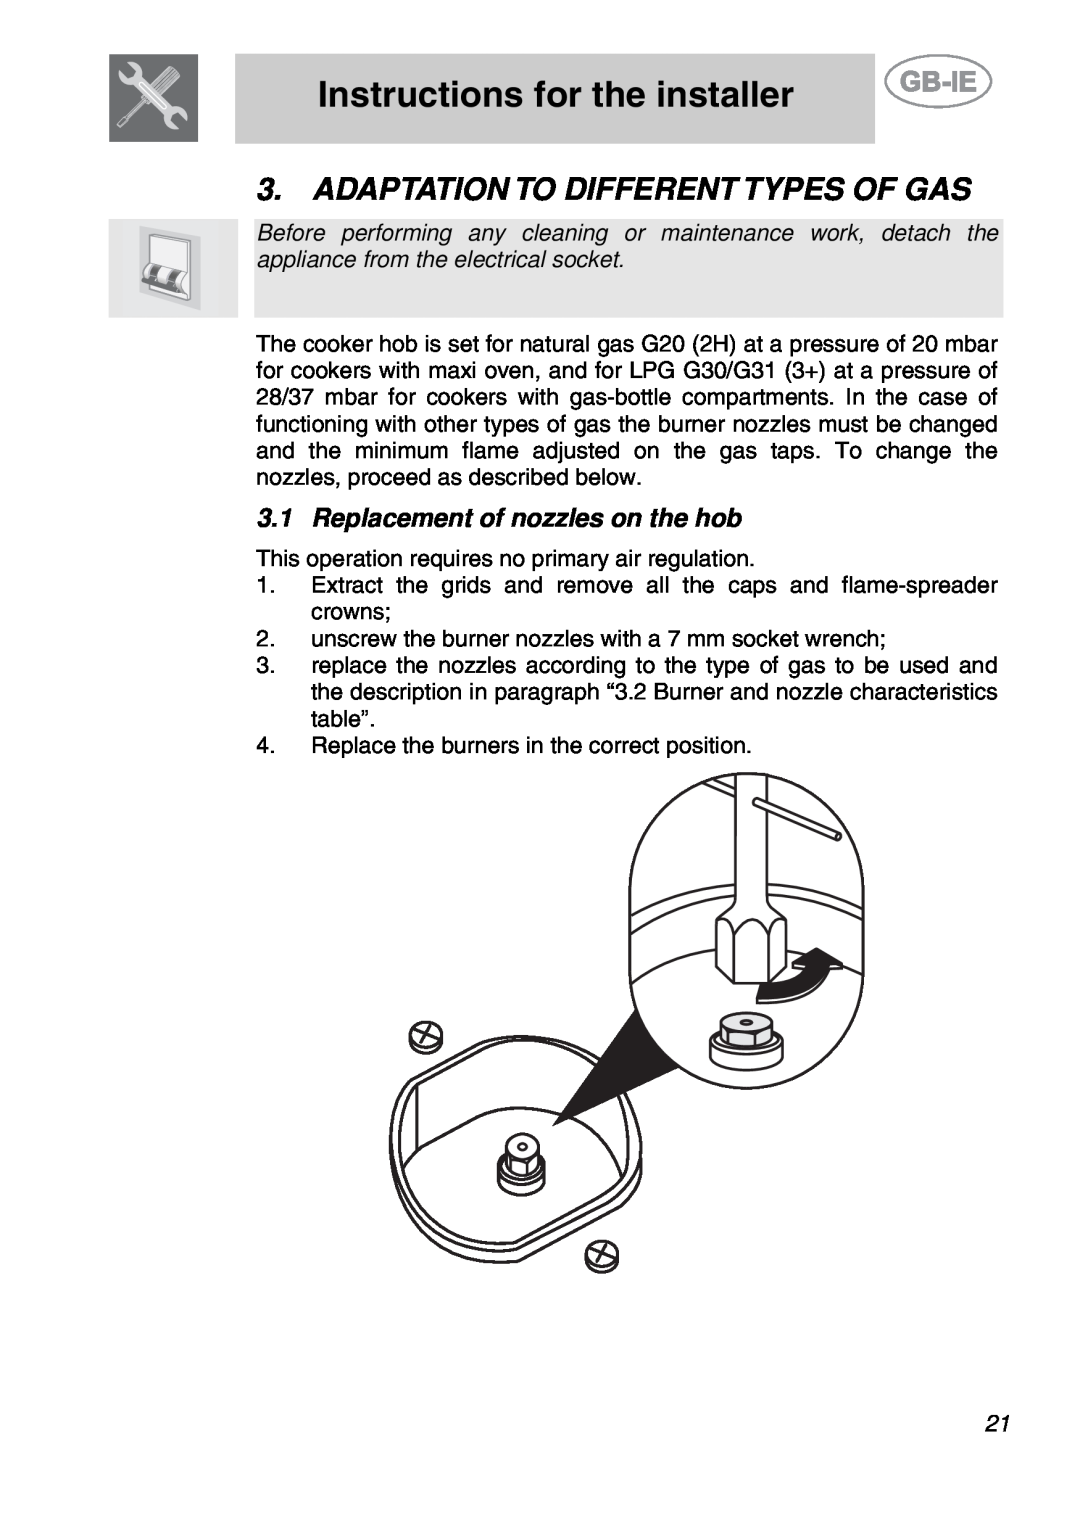 Smeg PS9R-3 manual Adaptation To Different Types Of Gas, Replacement of nozzles on the hob, Instructions for the installer 